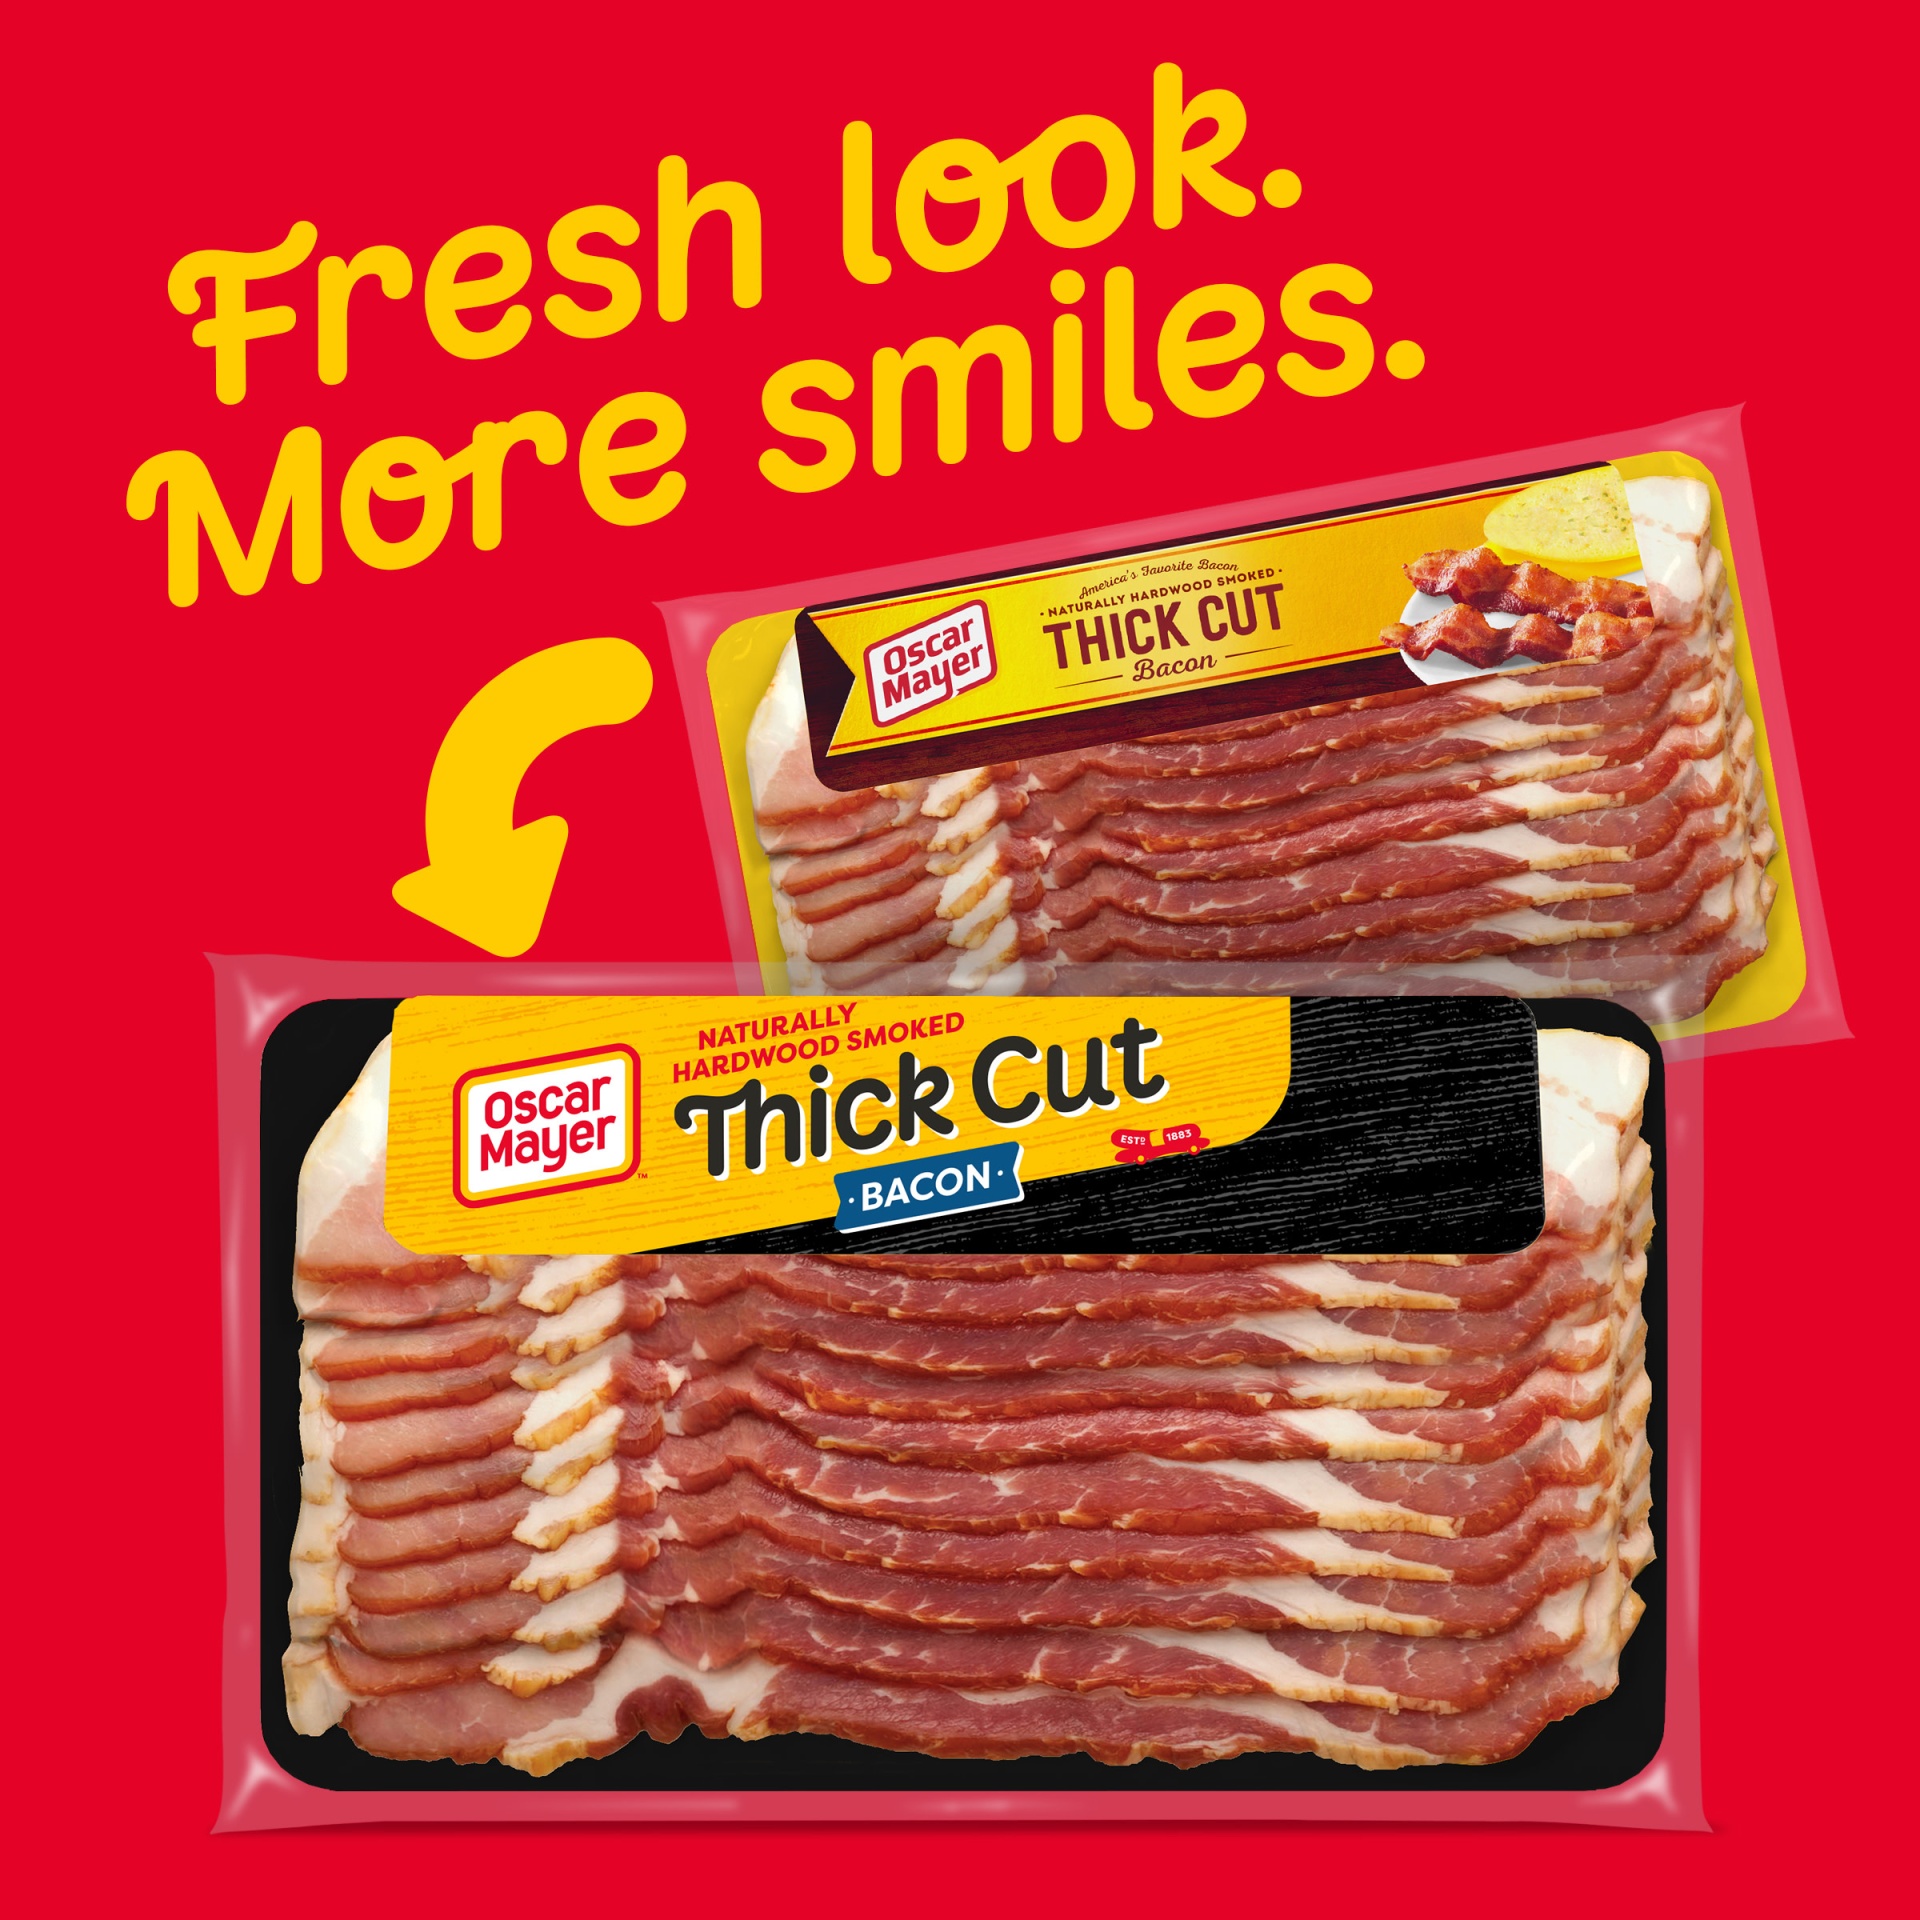 slide 2 of 7, Oscar Mayer Naturally Hardwood Smoked Thick Cut Bacon Pack, 11-13 slices, 16 oz